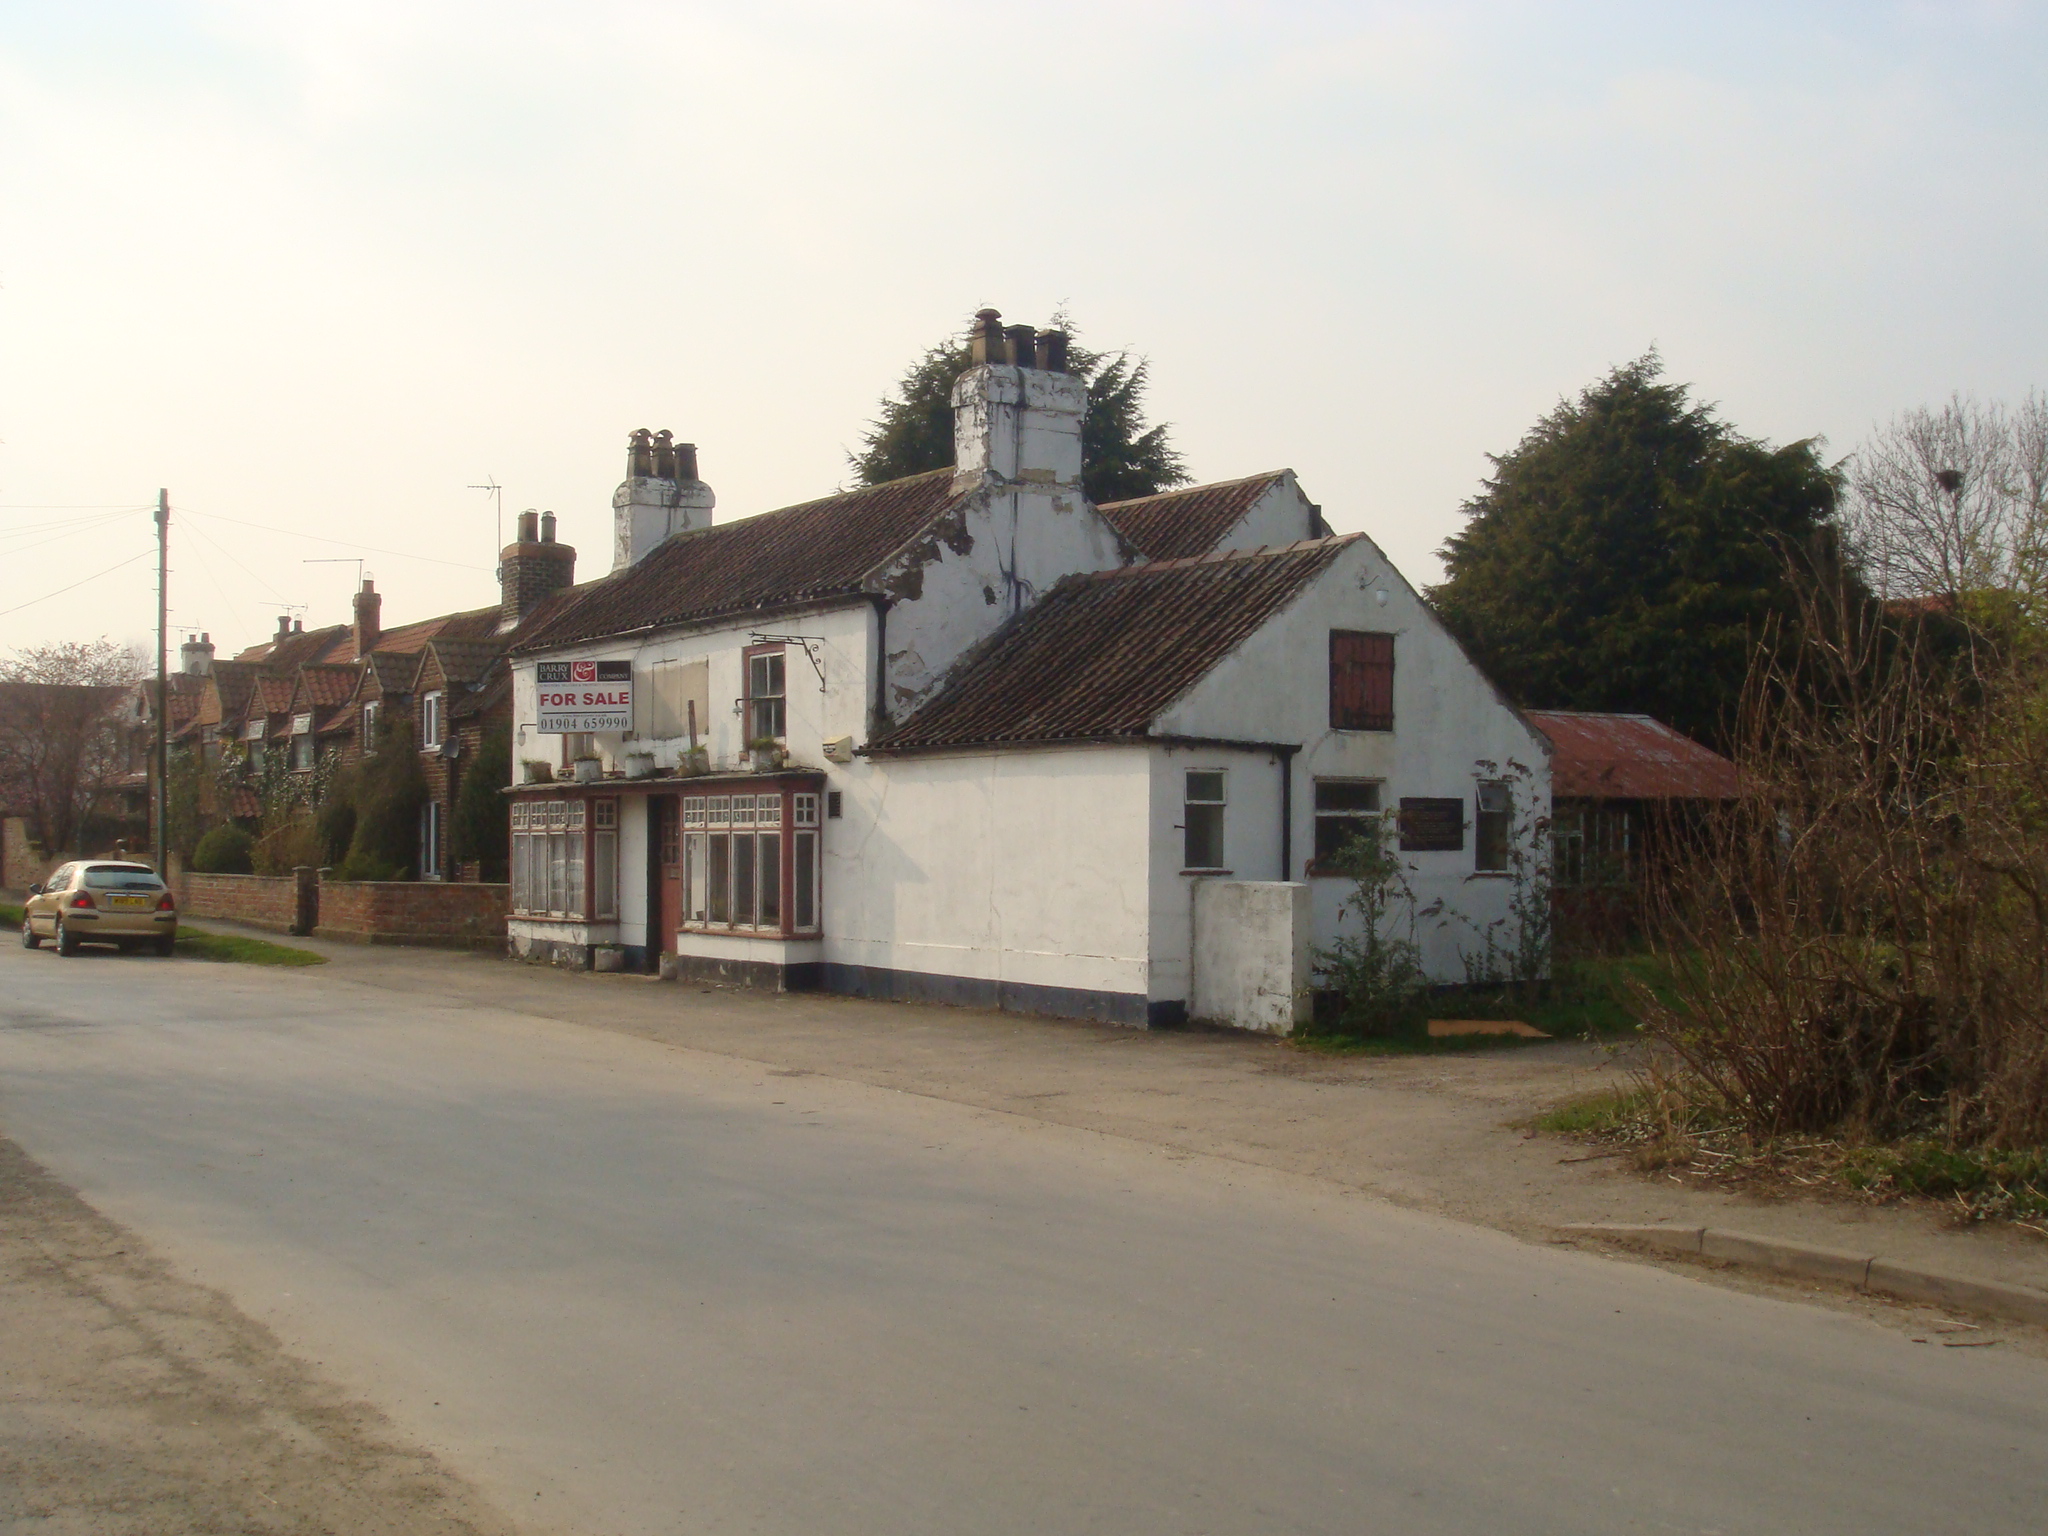 Neglected Pub Prior to Redevelopment within the Street Scene